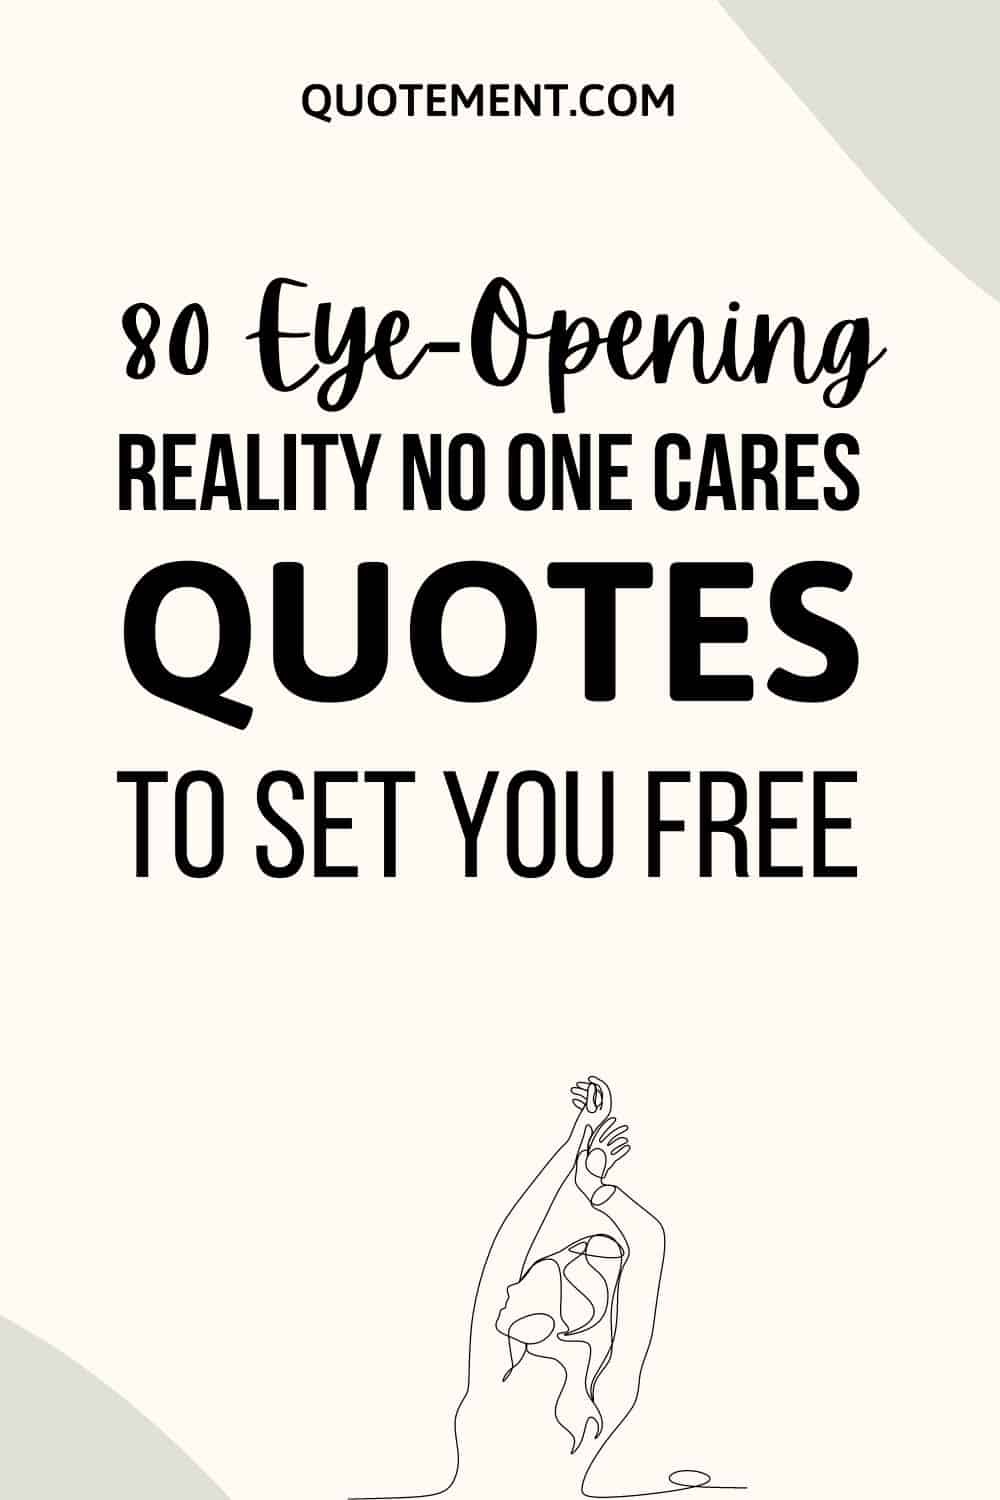 80 Eye-Opening Reality No One Cares Quotes To Set You Free
